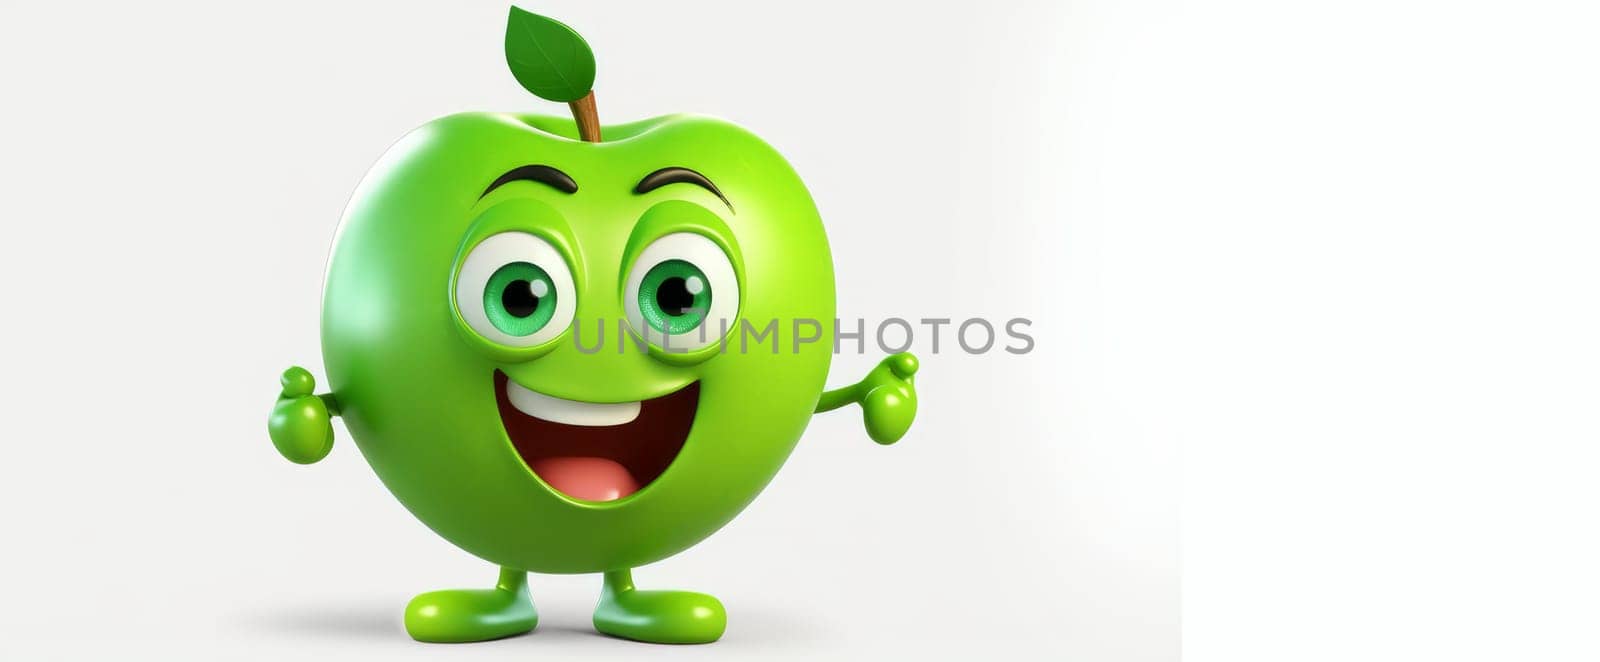 Green apple with a cheerful face 3D on a white background. Cartoon characters, three-dimensional character, healthy lifestyle, proper nutrition, diet, fresh vegetables and fruits, vegetarianism, veganism, food, breakfast, fun, laughter, banner